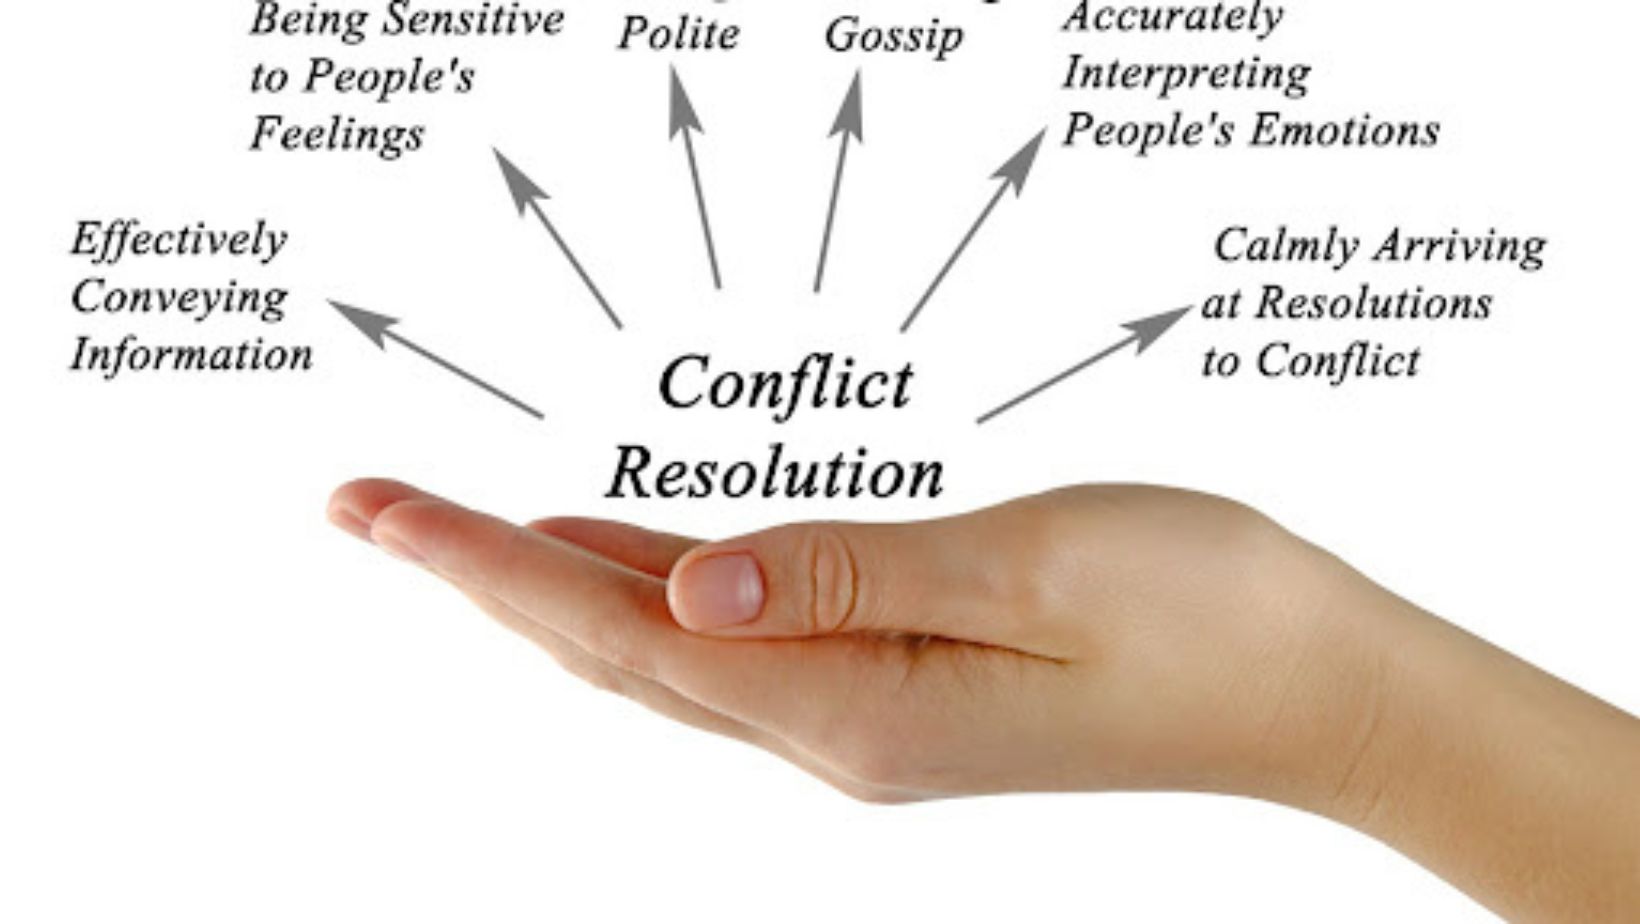 briefly describe the factors and characteristics that influence conflict resolution.